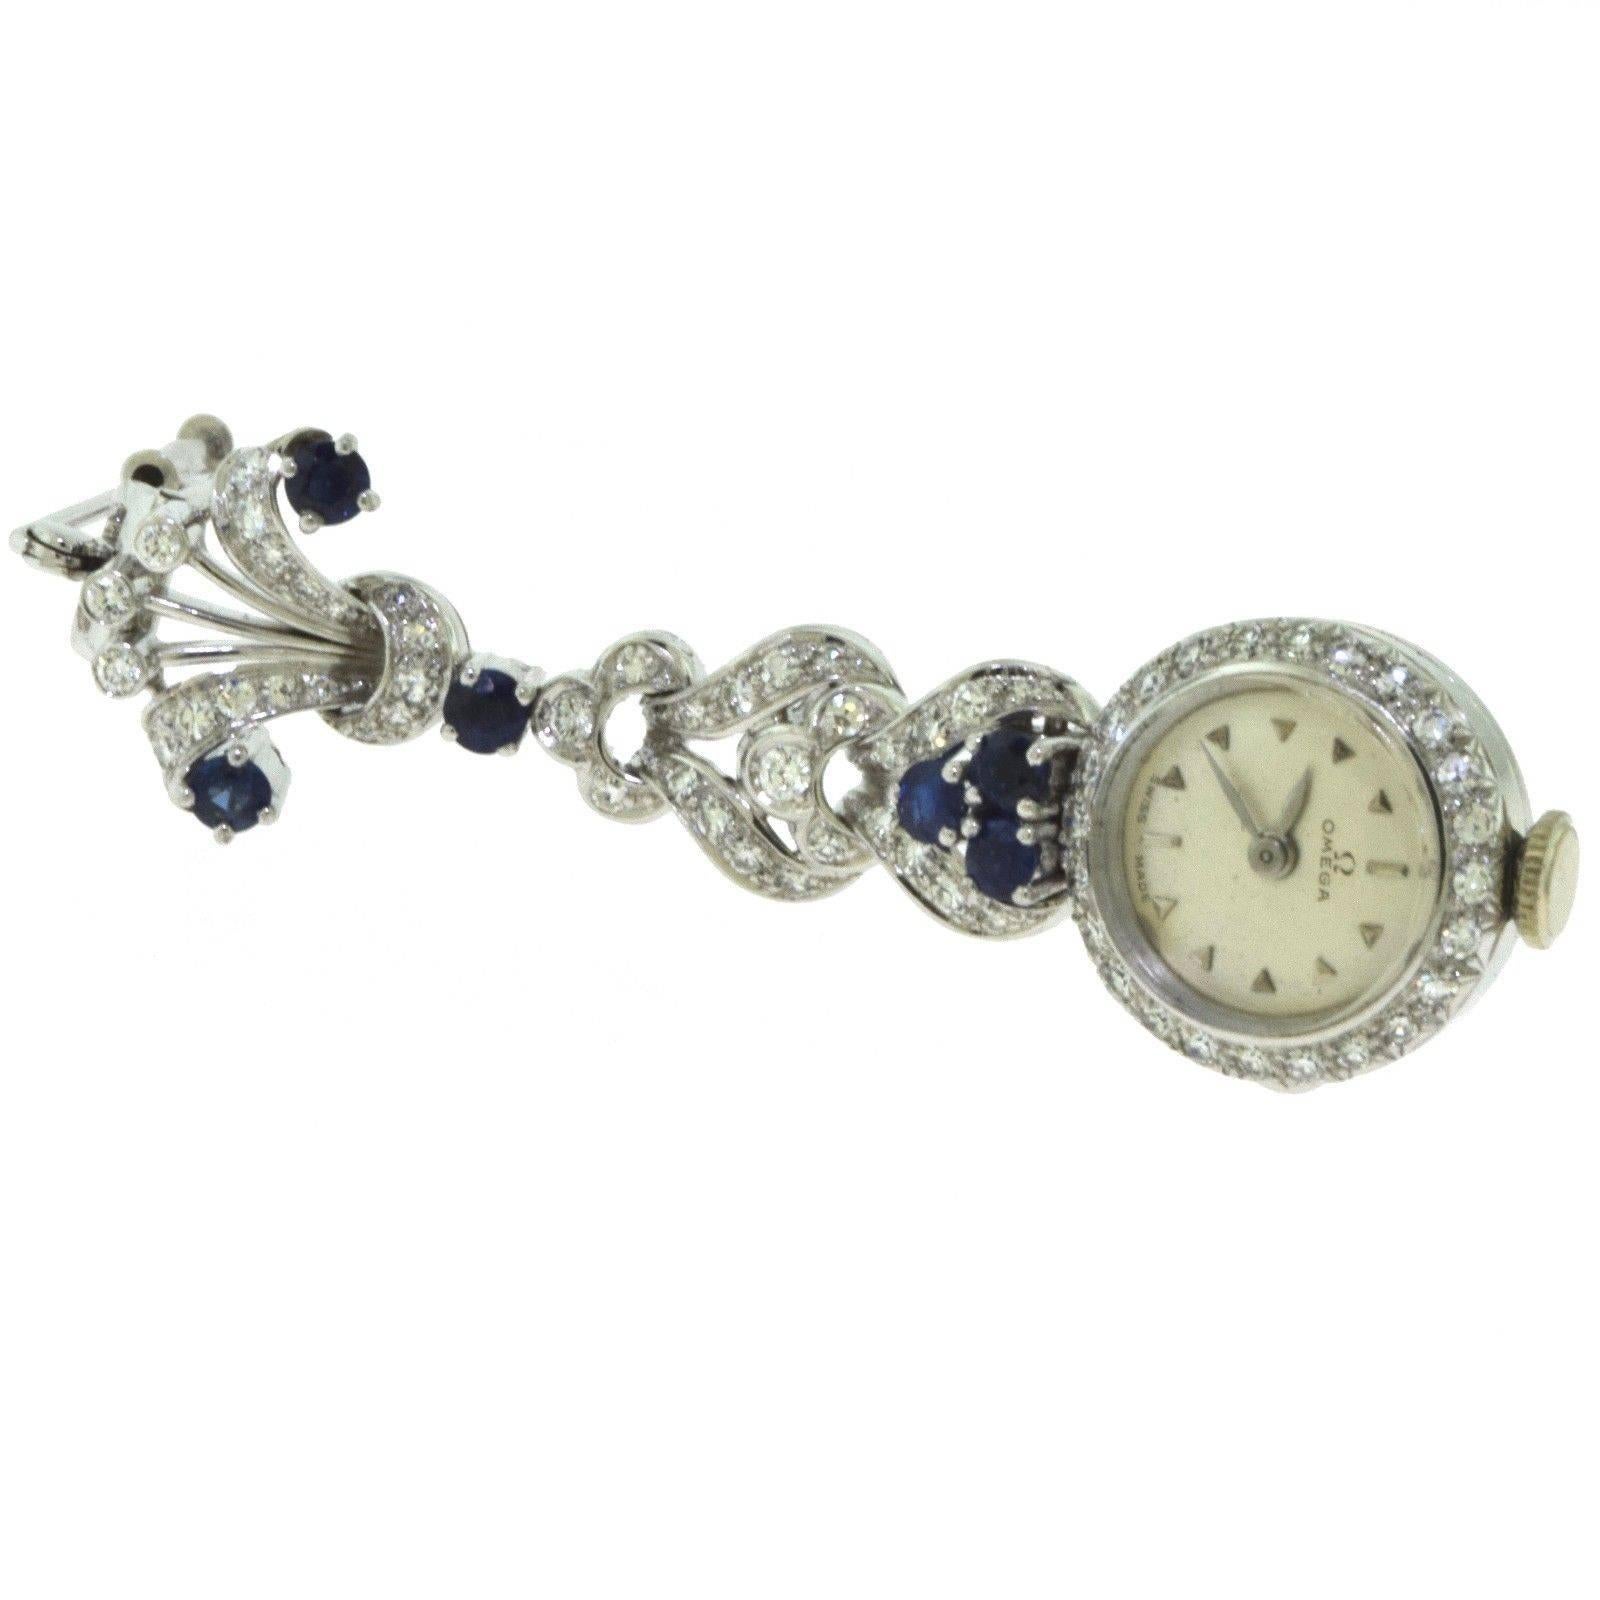 1940s Vintage Omega Diamond and Sapphire White Gold Falling Brooch / Pin / Watch For Sale 1